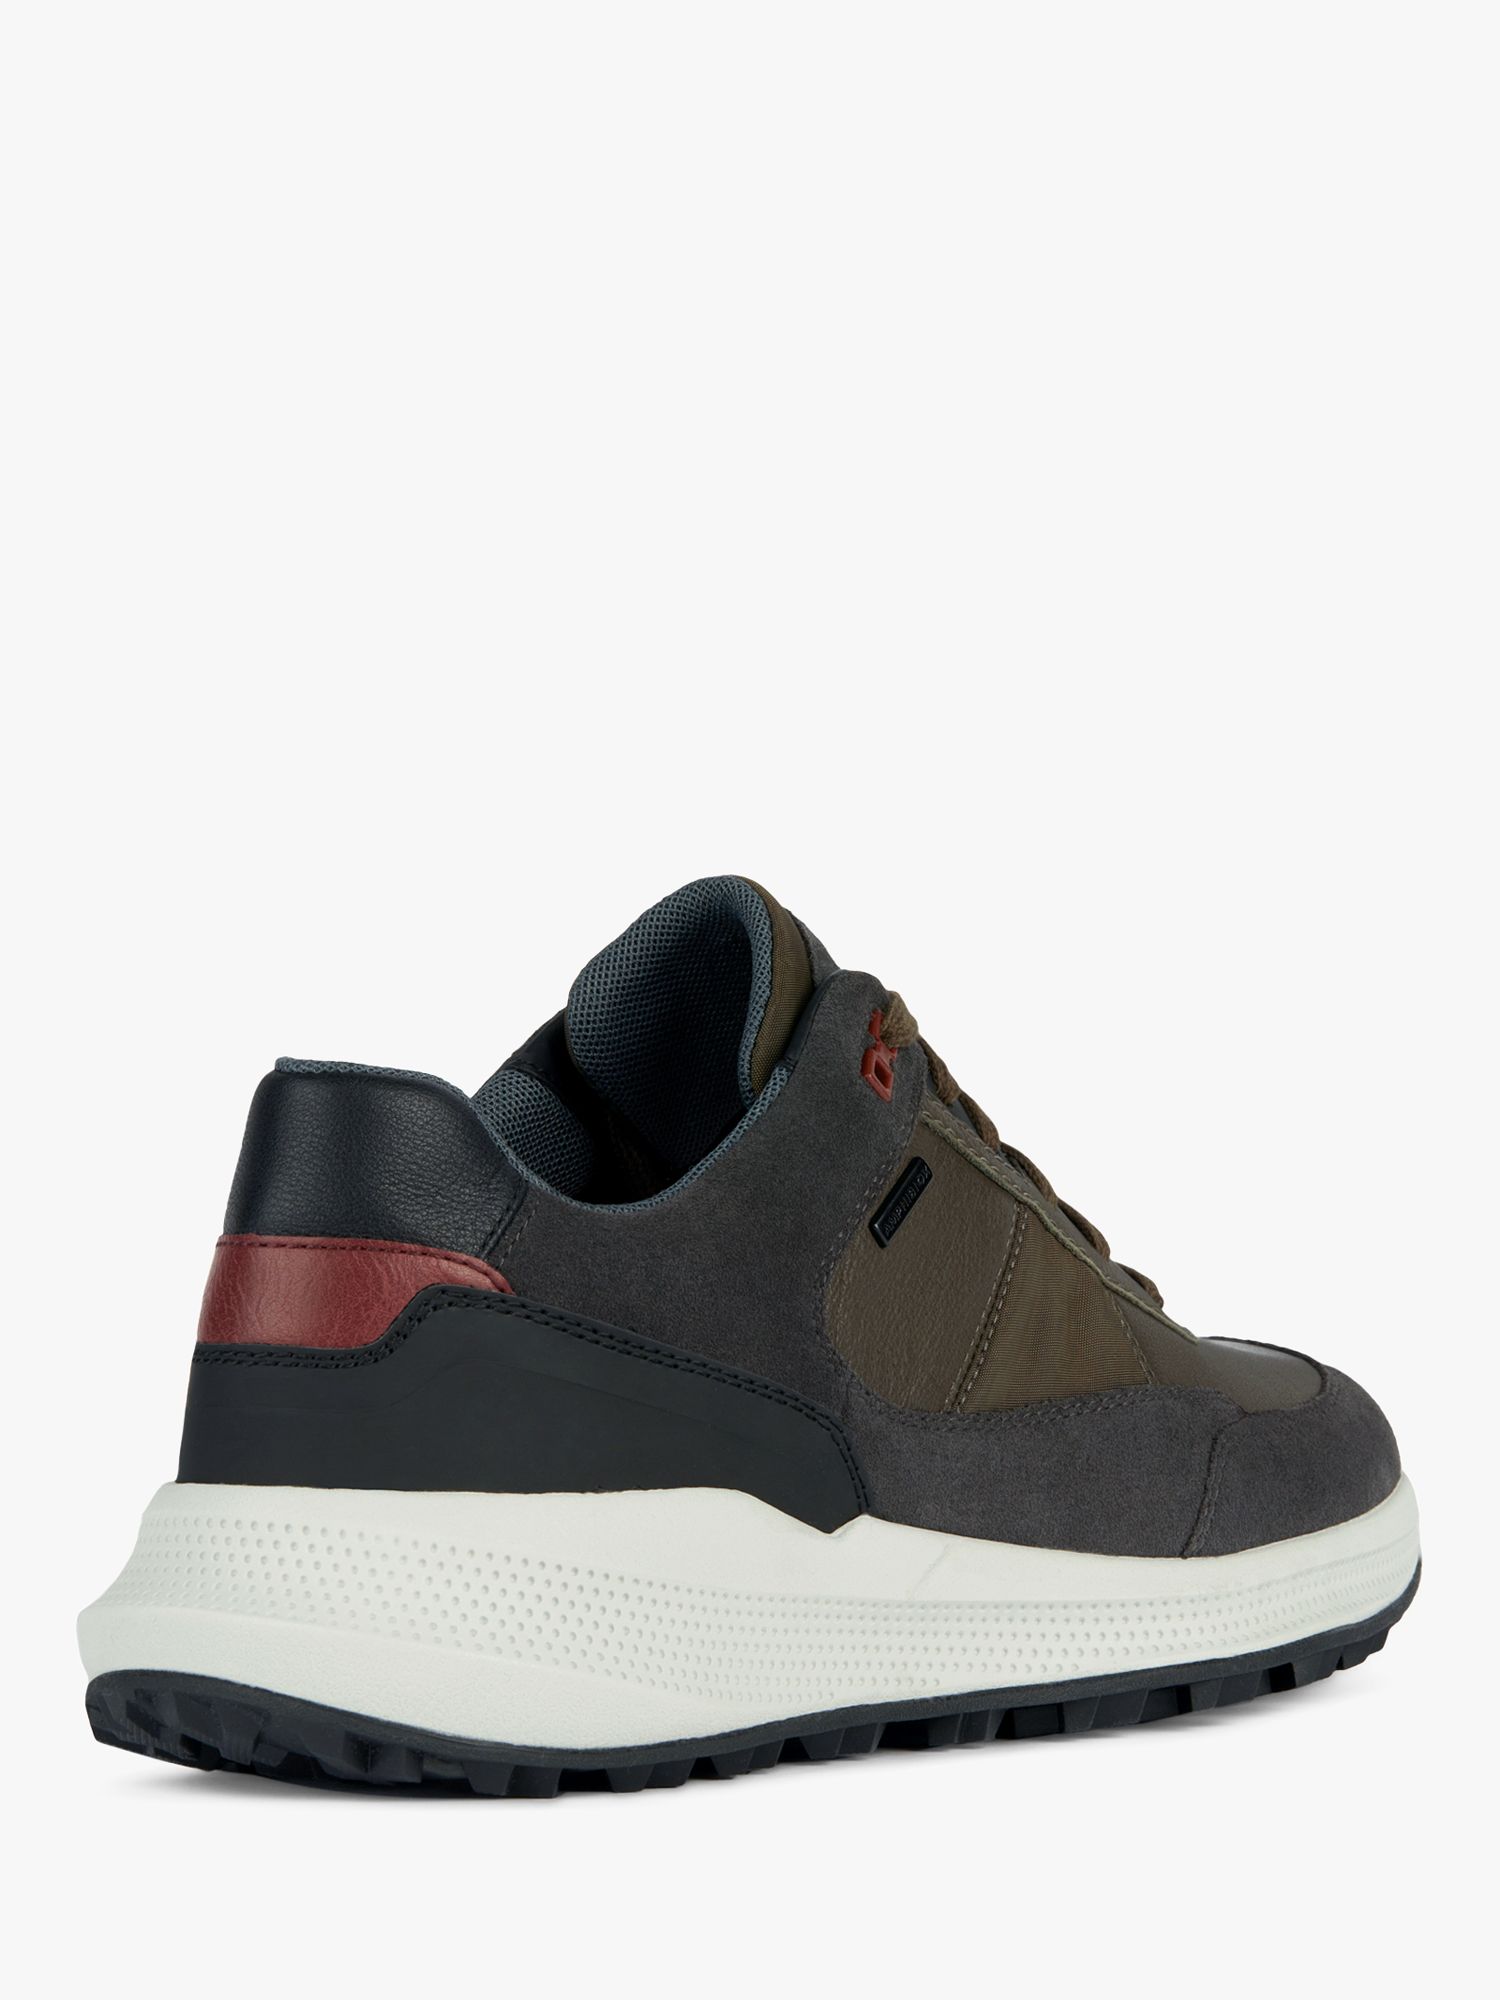 Geox Wide Fit PG1X ABX Men's Trainers, Military/Dark Grey at John Lewis ...